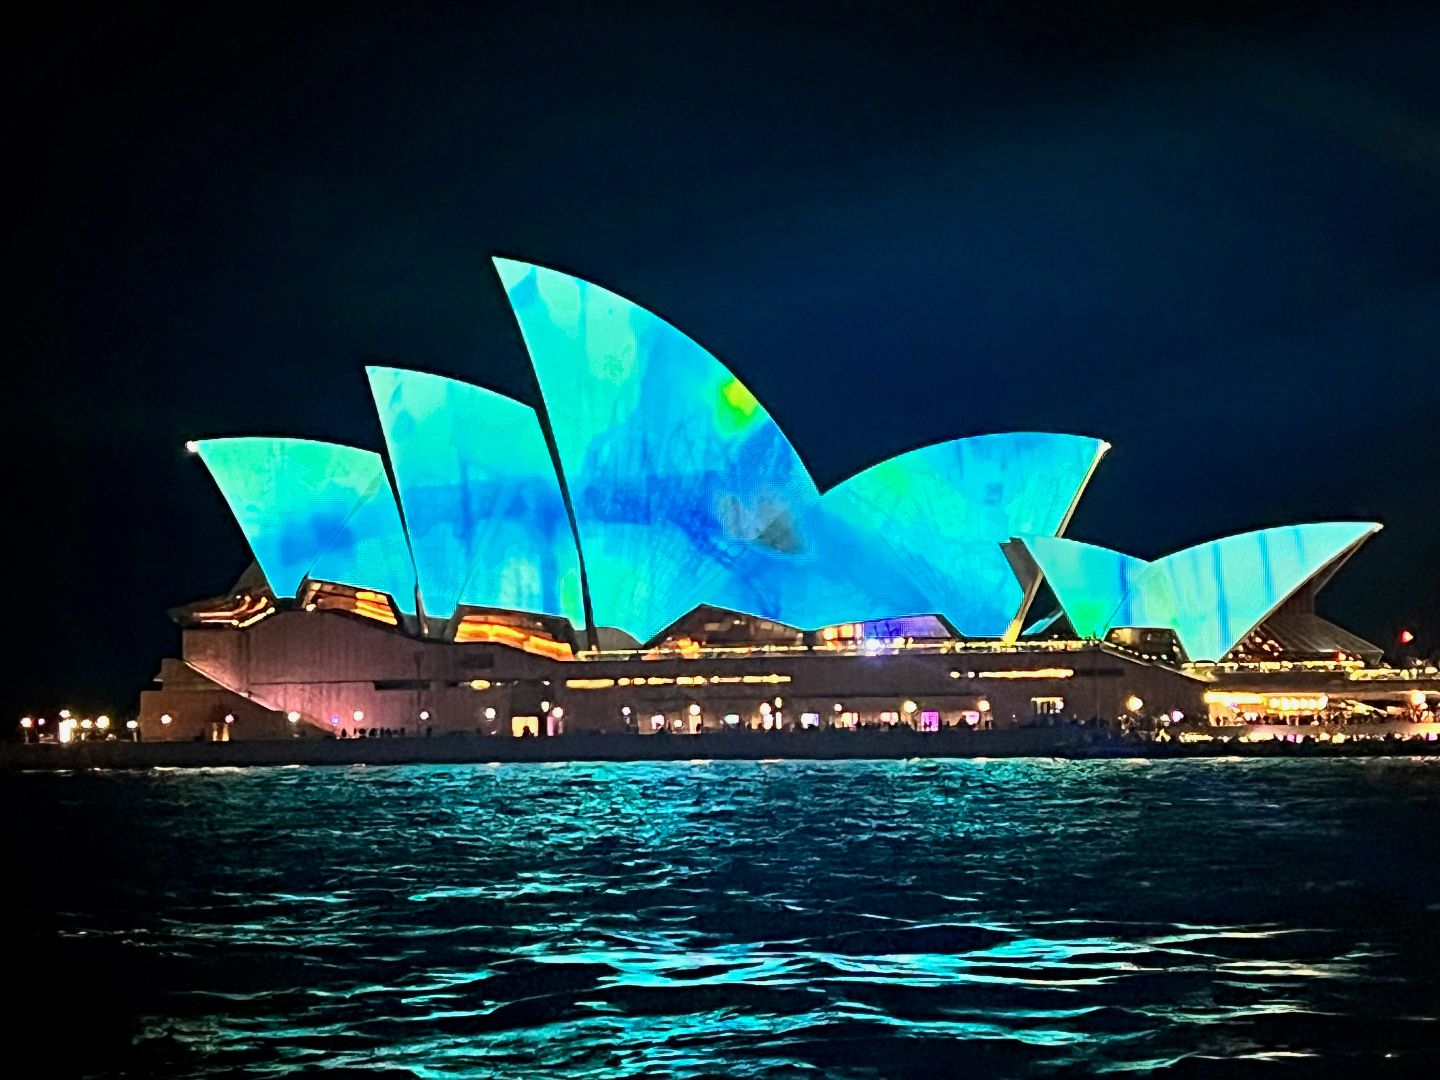 Bright green and blue lighting on the Opera House at night